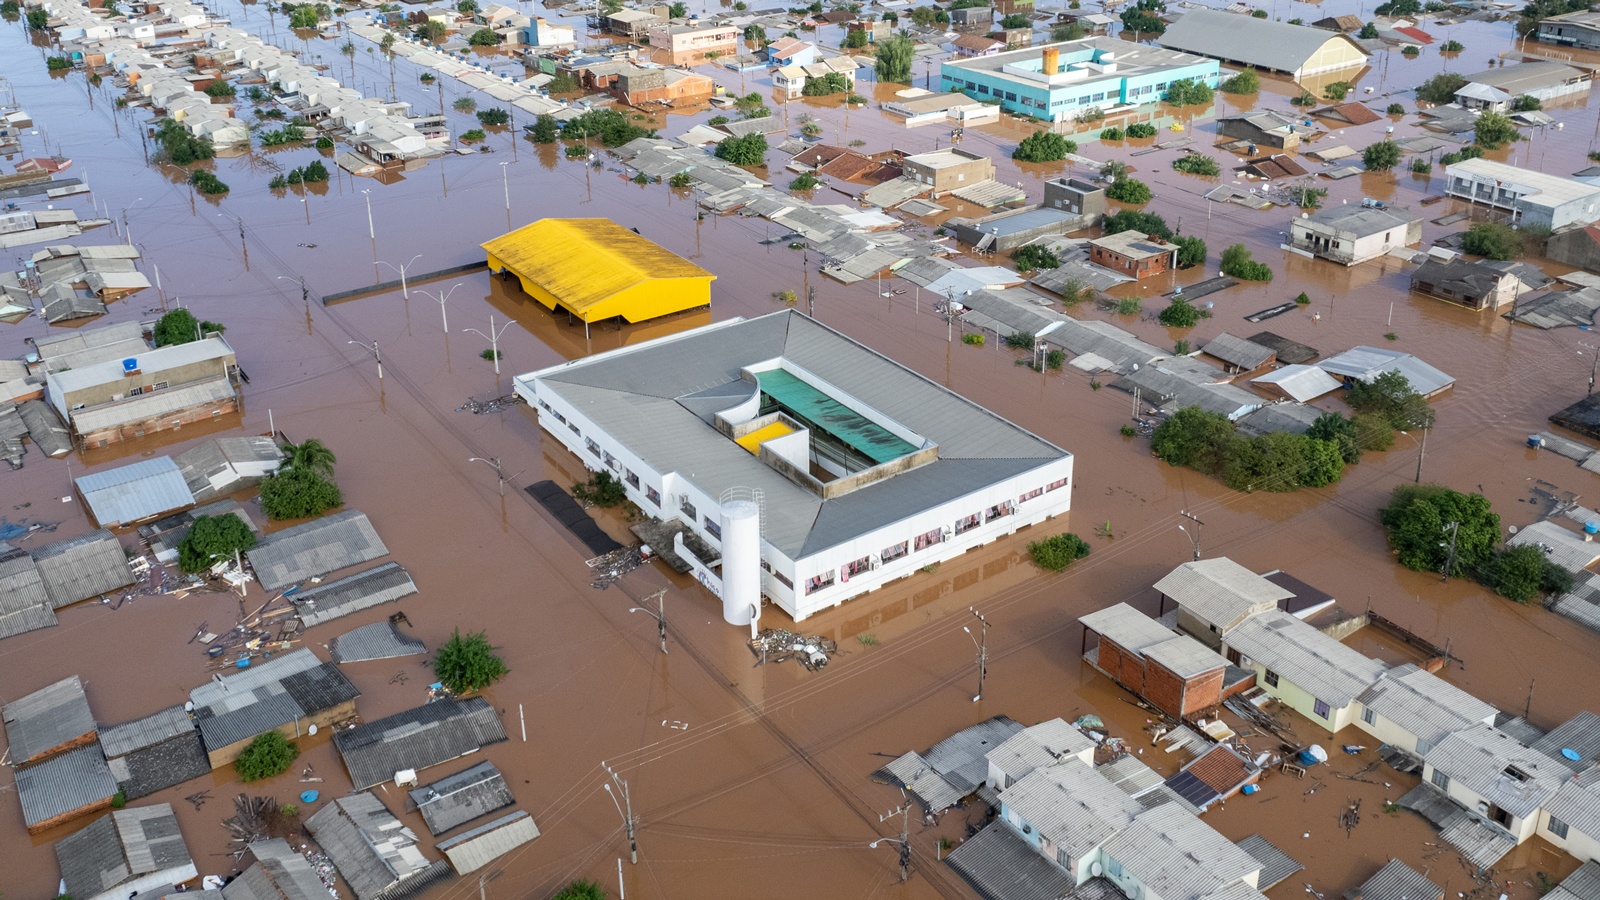 Devastating Brazil floods will become more common if emissions are not cut, scientists warn